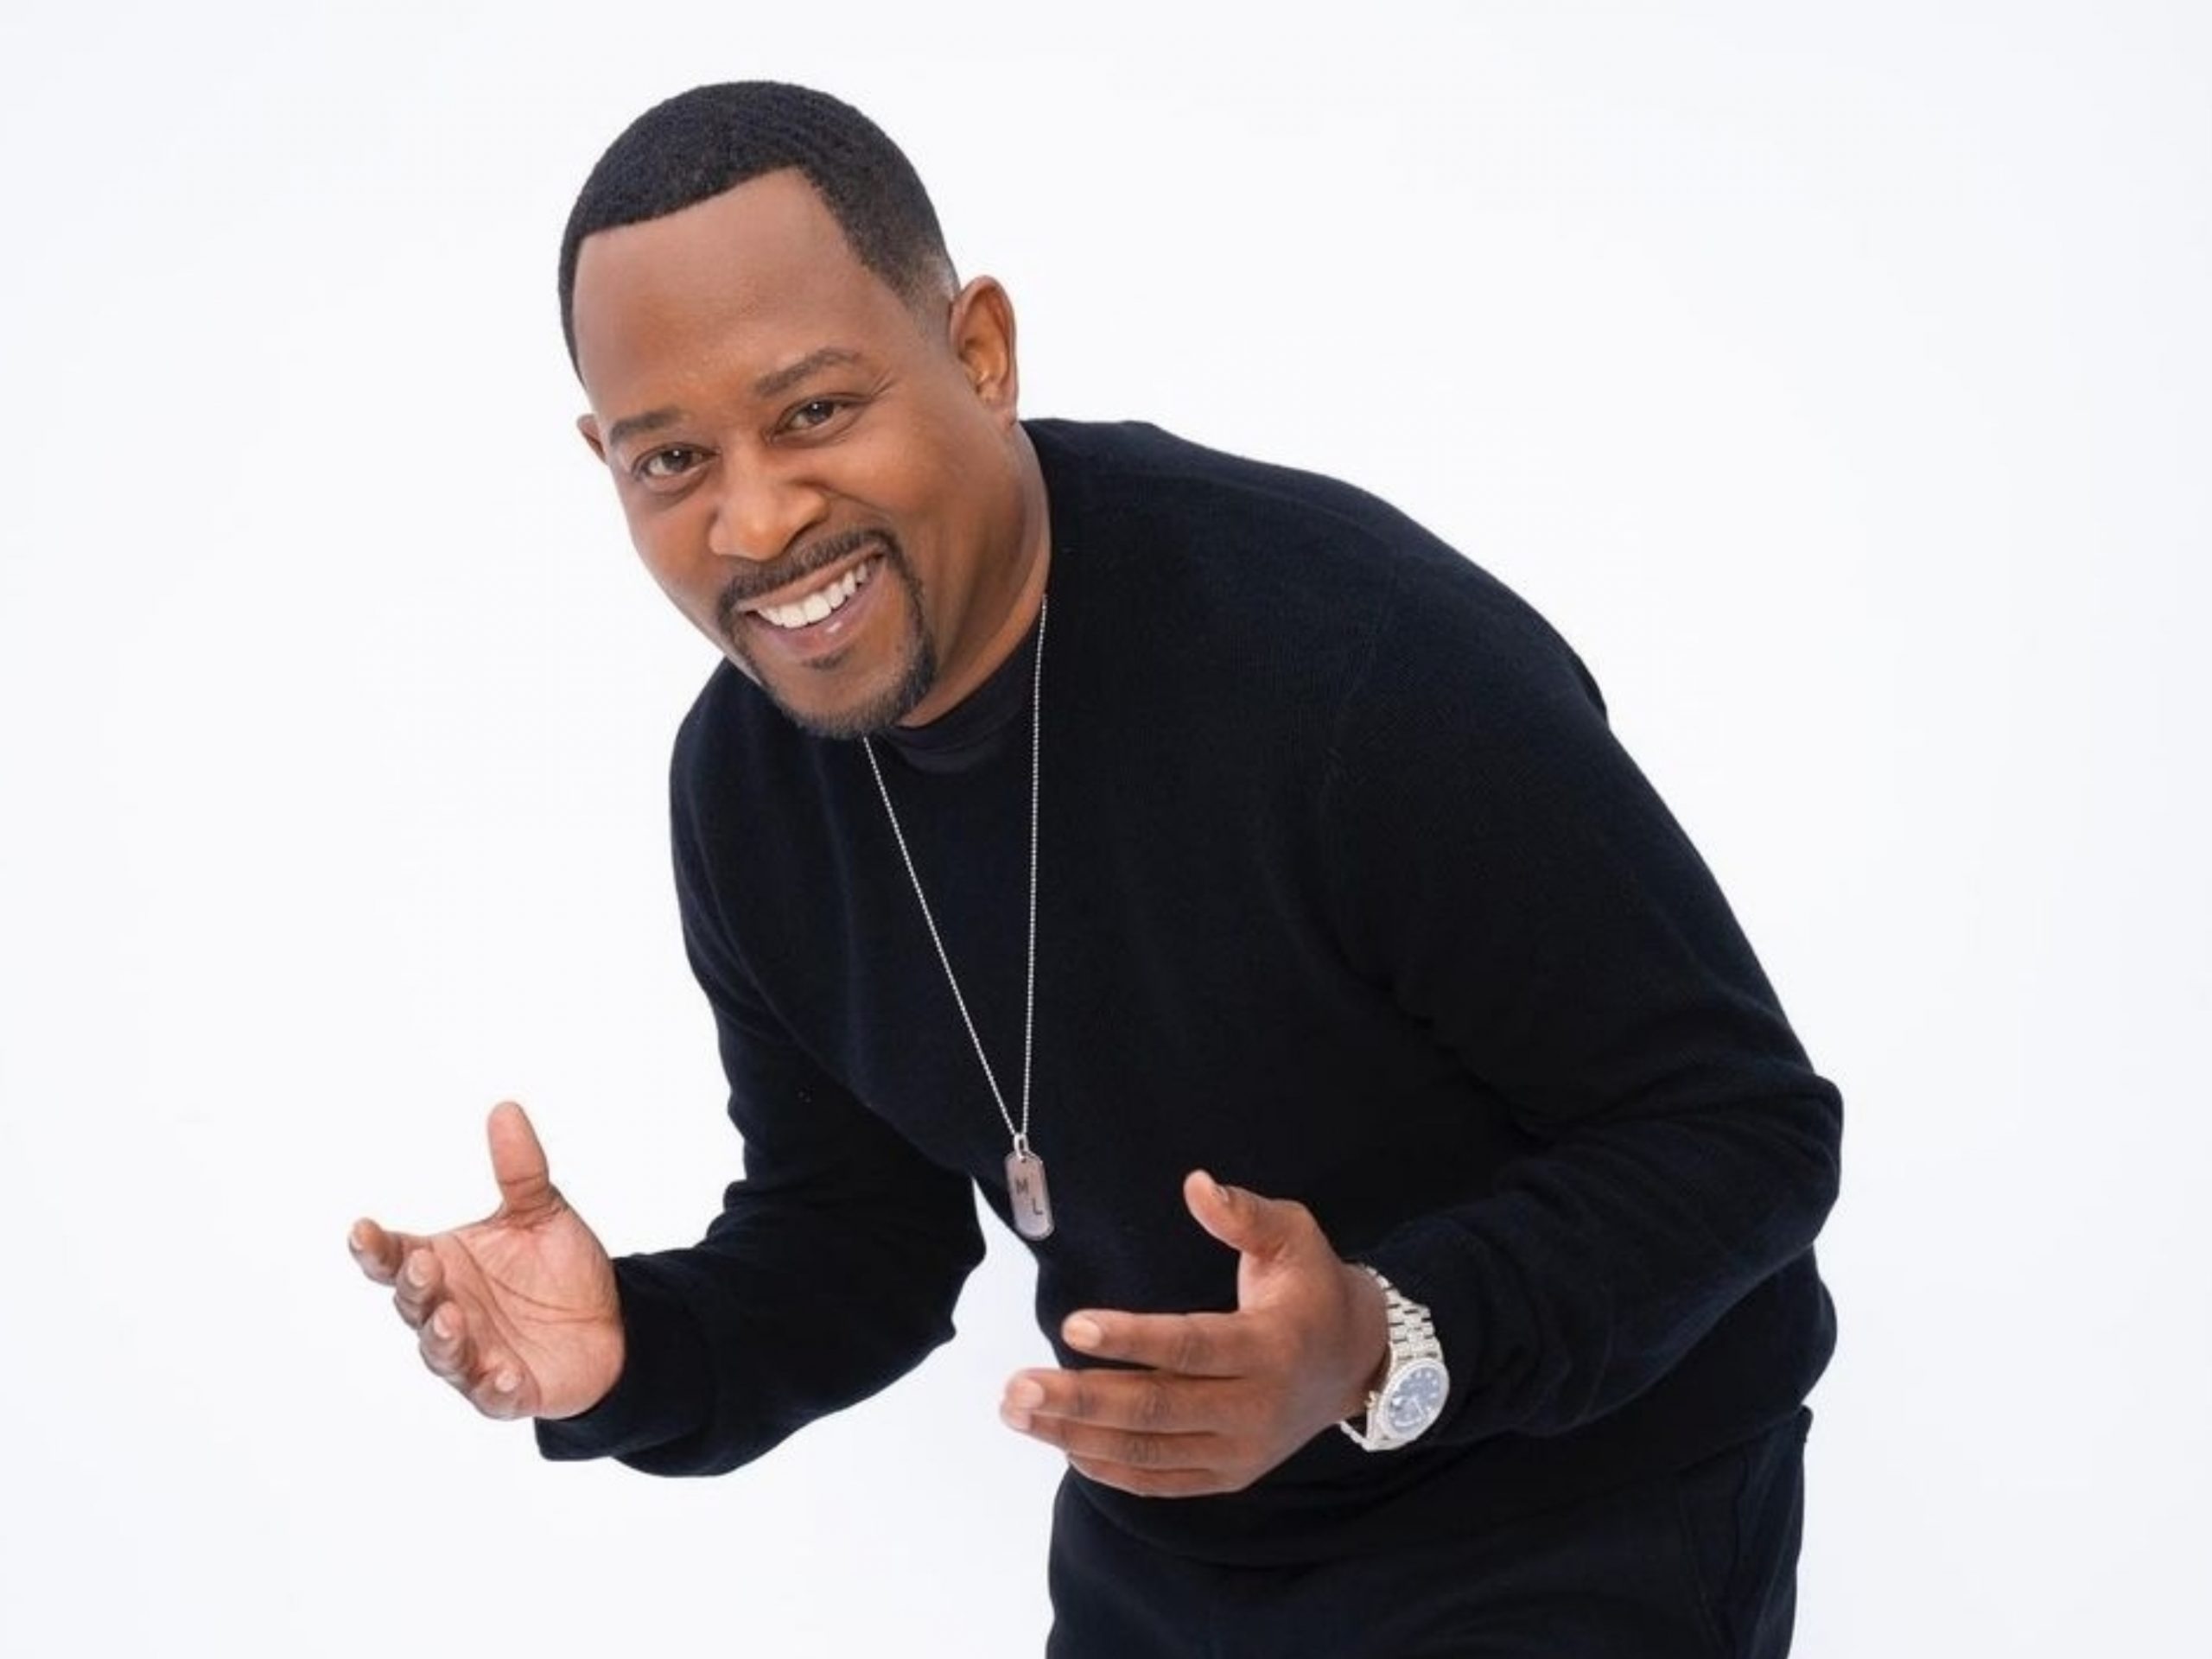 Martin Lawrence Receives Star on Hollwood Walk of Fame